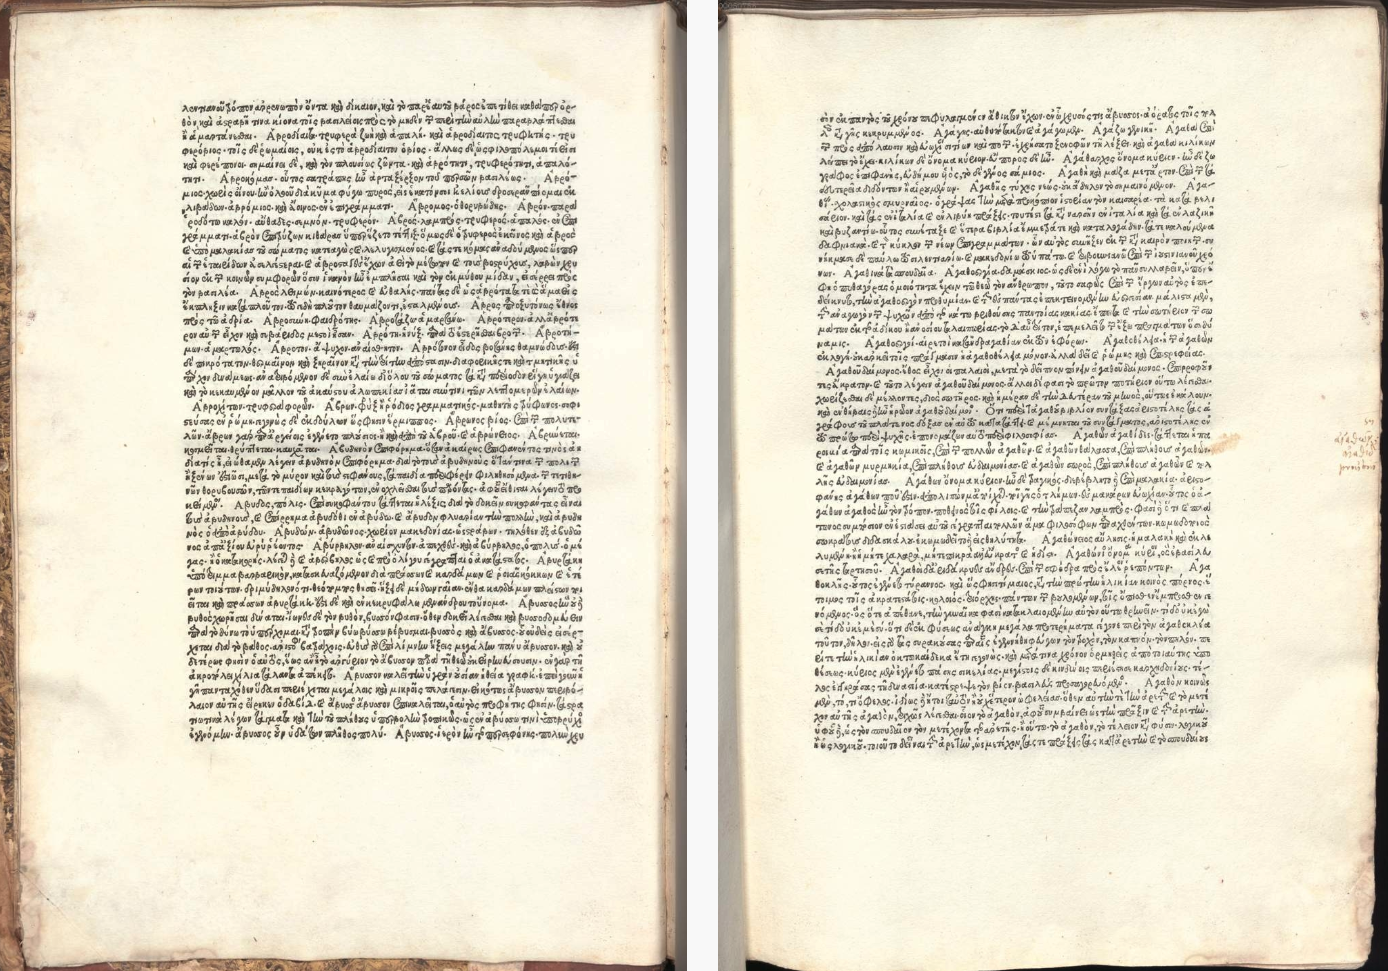 First printed edition of the Suda (1499). This was the largest work printed in Greek during the 15th century. Bayerische Staatsbibliothek.